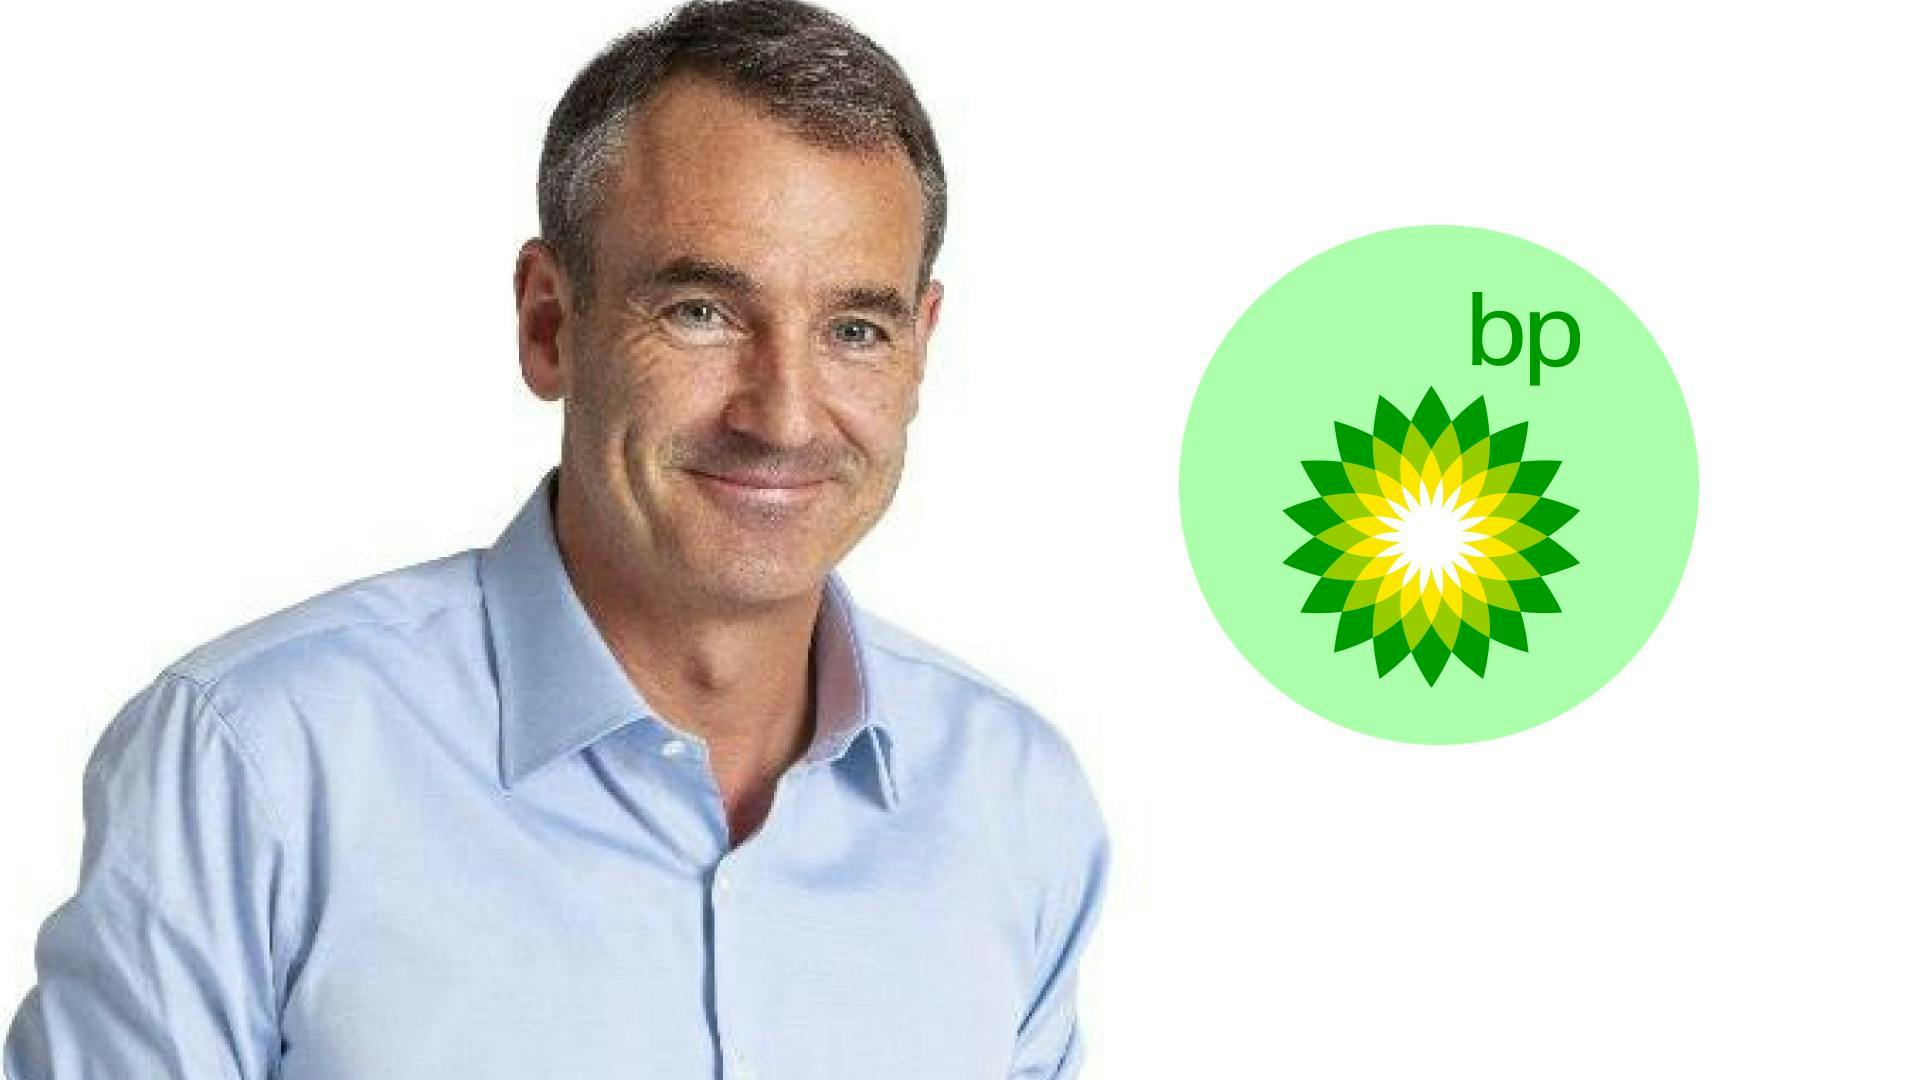 BP Mandates Disclosure of Intimate Relationships Following CEO Scandal